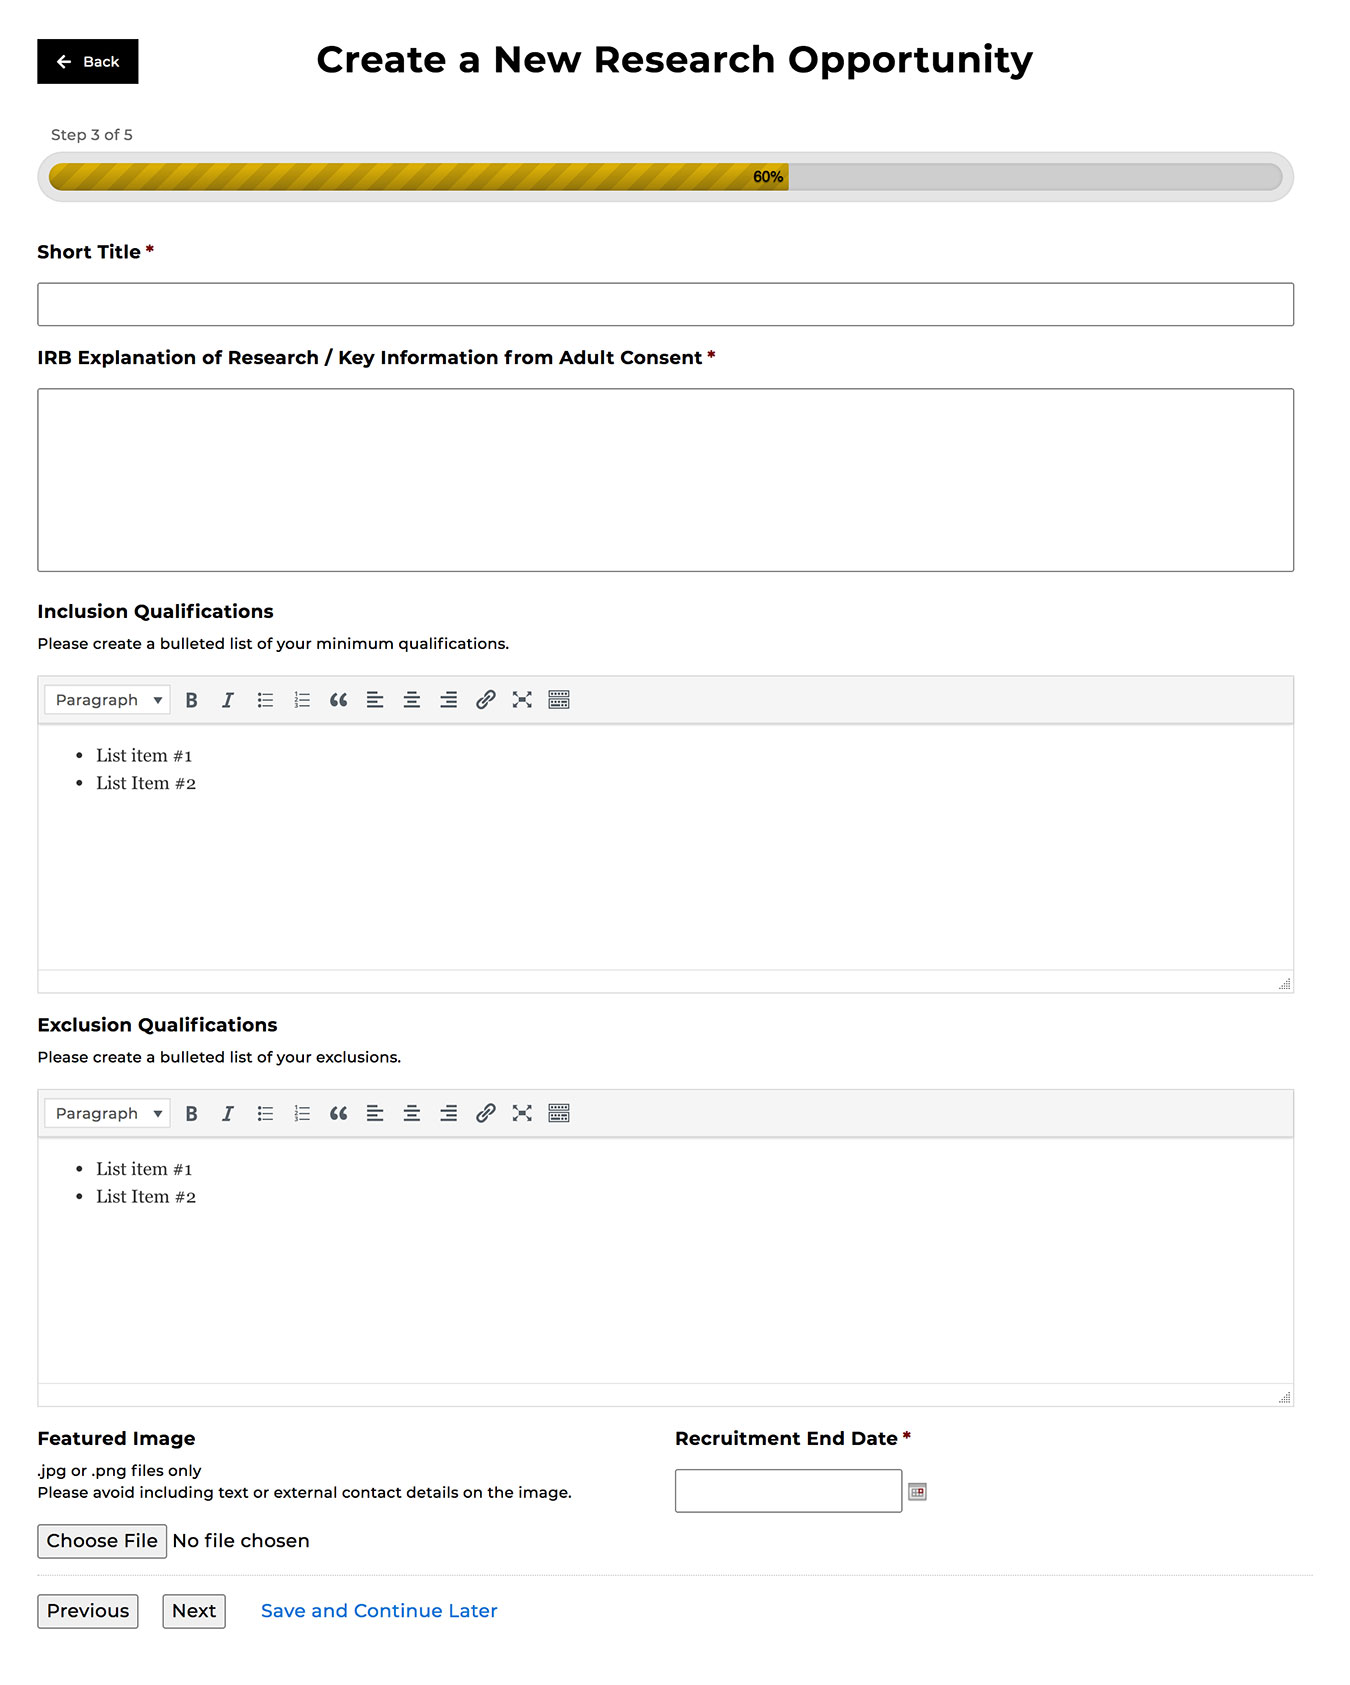 a screenshot of the form used to create a new research opportunity